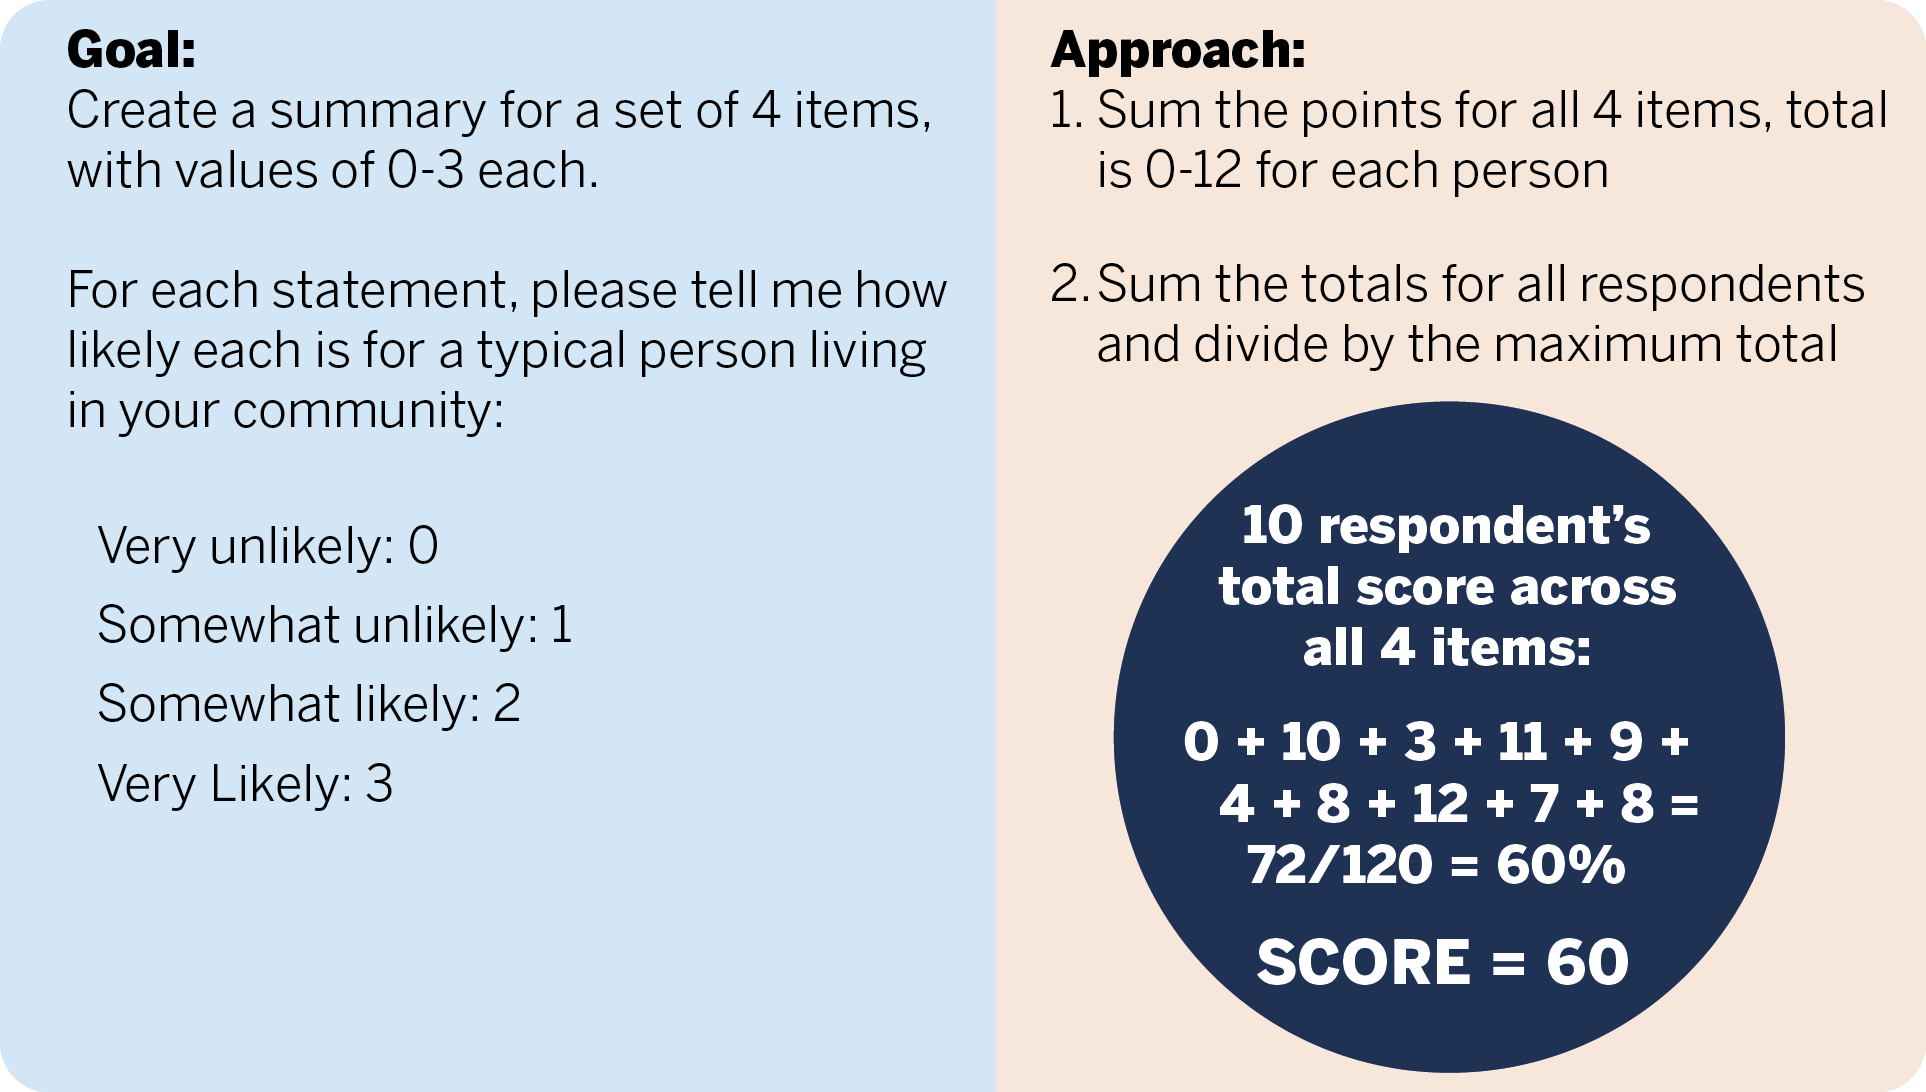 Goal: Create a summary for a set of 4 items (very unlikely = 0, somewhat unlikely: 1, somewhat likely: 2, very likely: 3), with values of 0-3 each; Approach: 1. Sum the points for all 4 items, total is 0-12 for each person, 2. Sum the totals for all respondents and divide by the maximum total